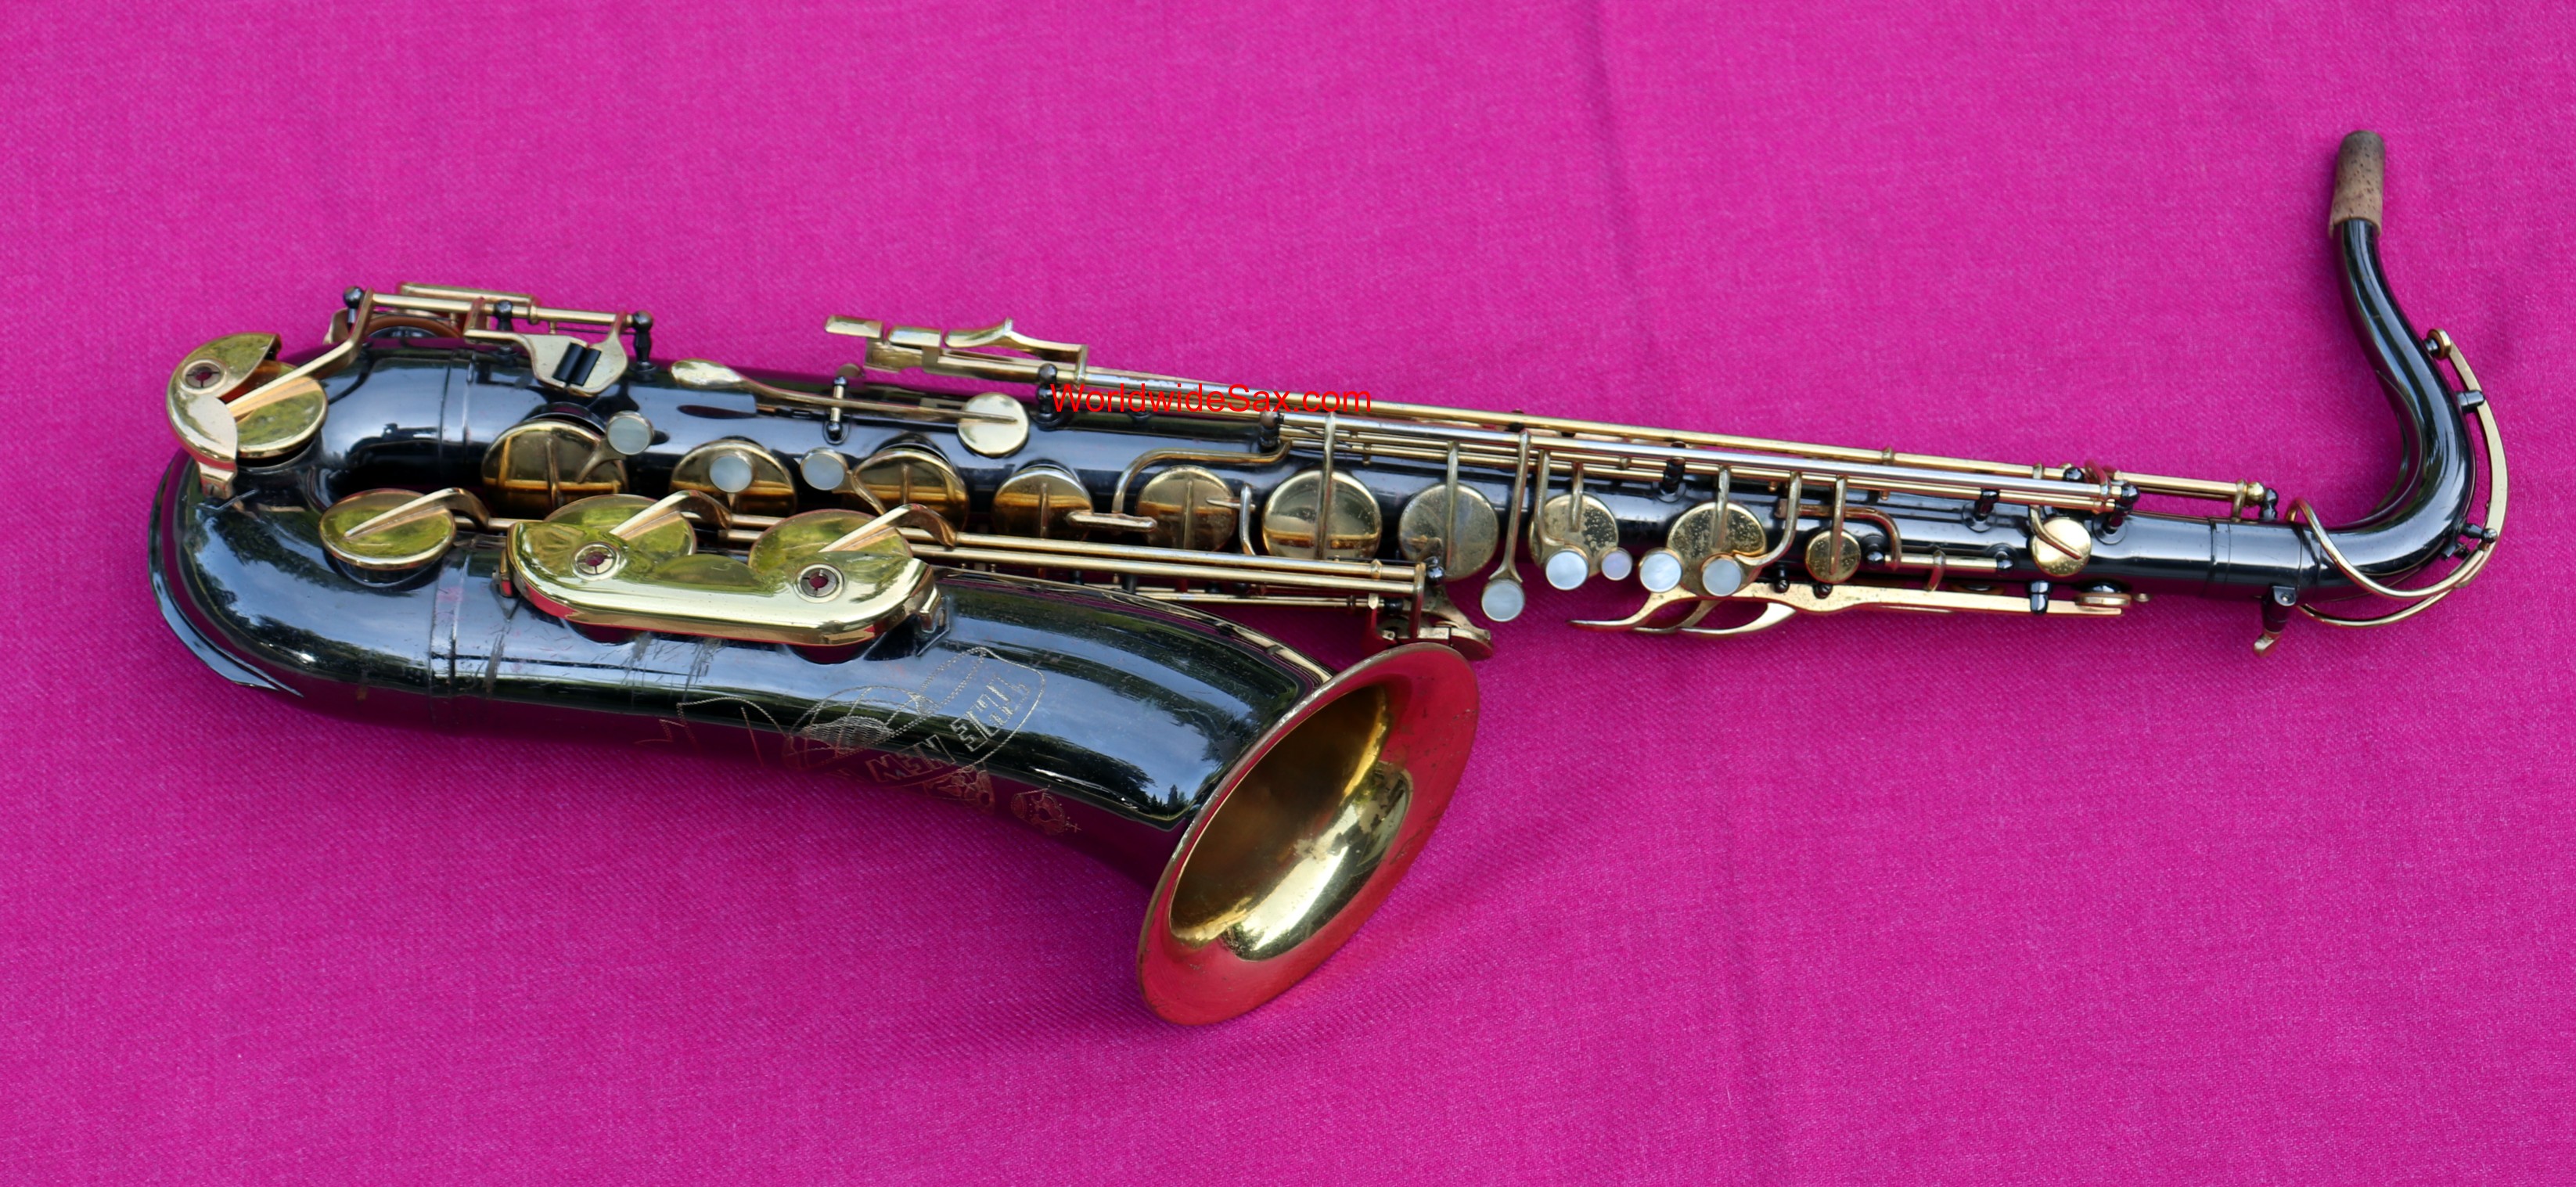 Keilwerth 1963 'The New King' Bb Tenor, Black Nickel, #47k (Archived)